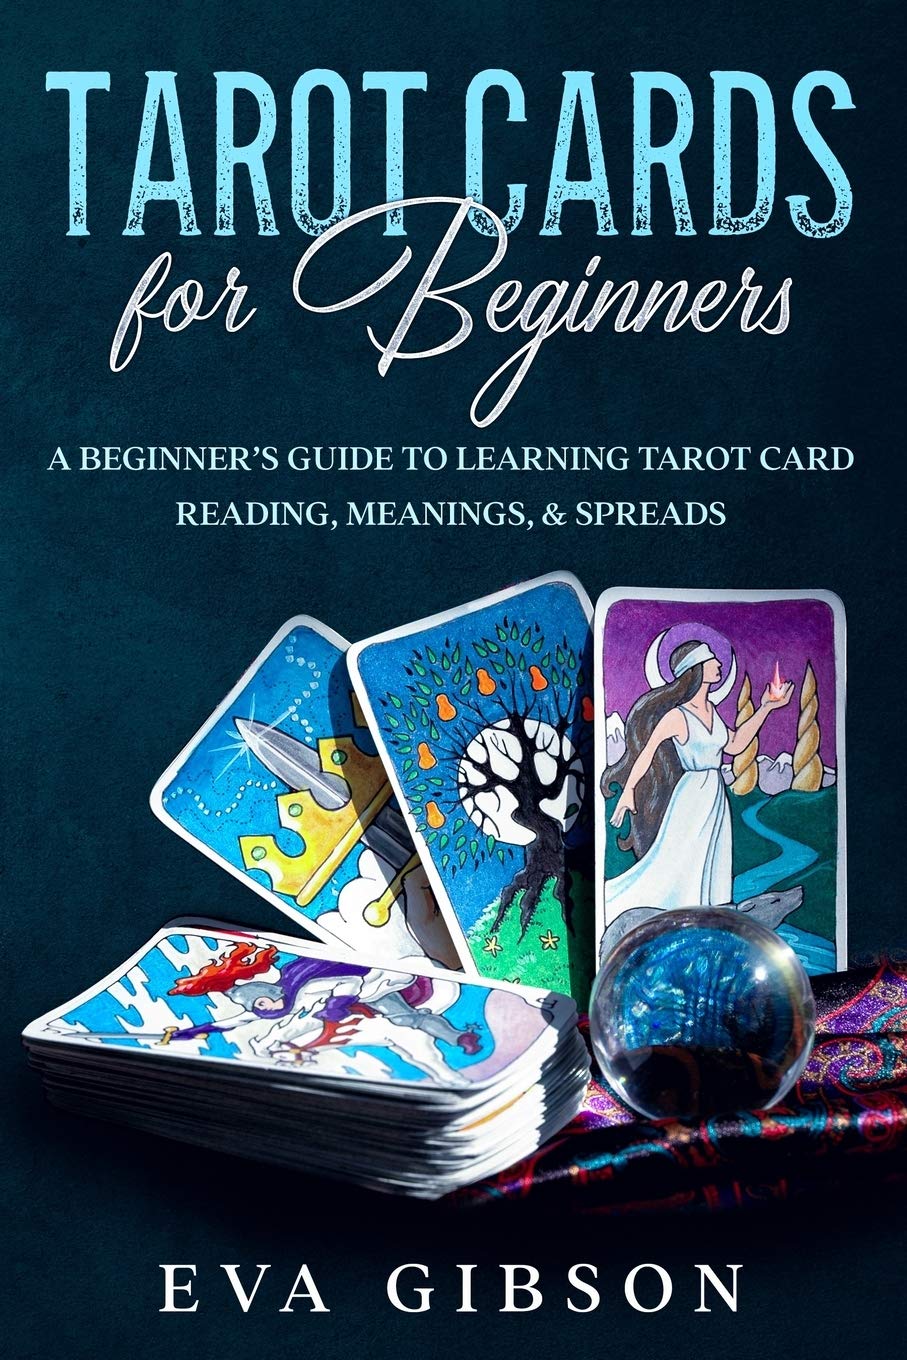 Tarot Cards for Beginners: A Beginner's Guide to Learning Tarot Card Reading, Meanings, & Spreads - SureShot Books Publishing LLC